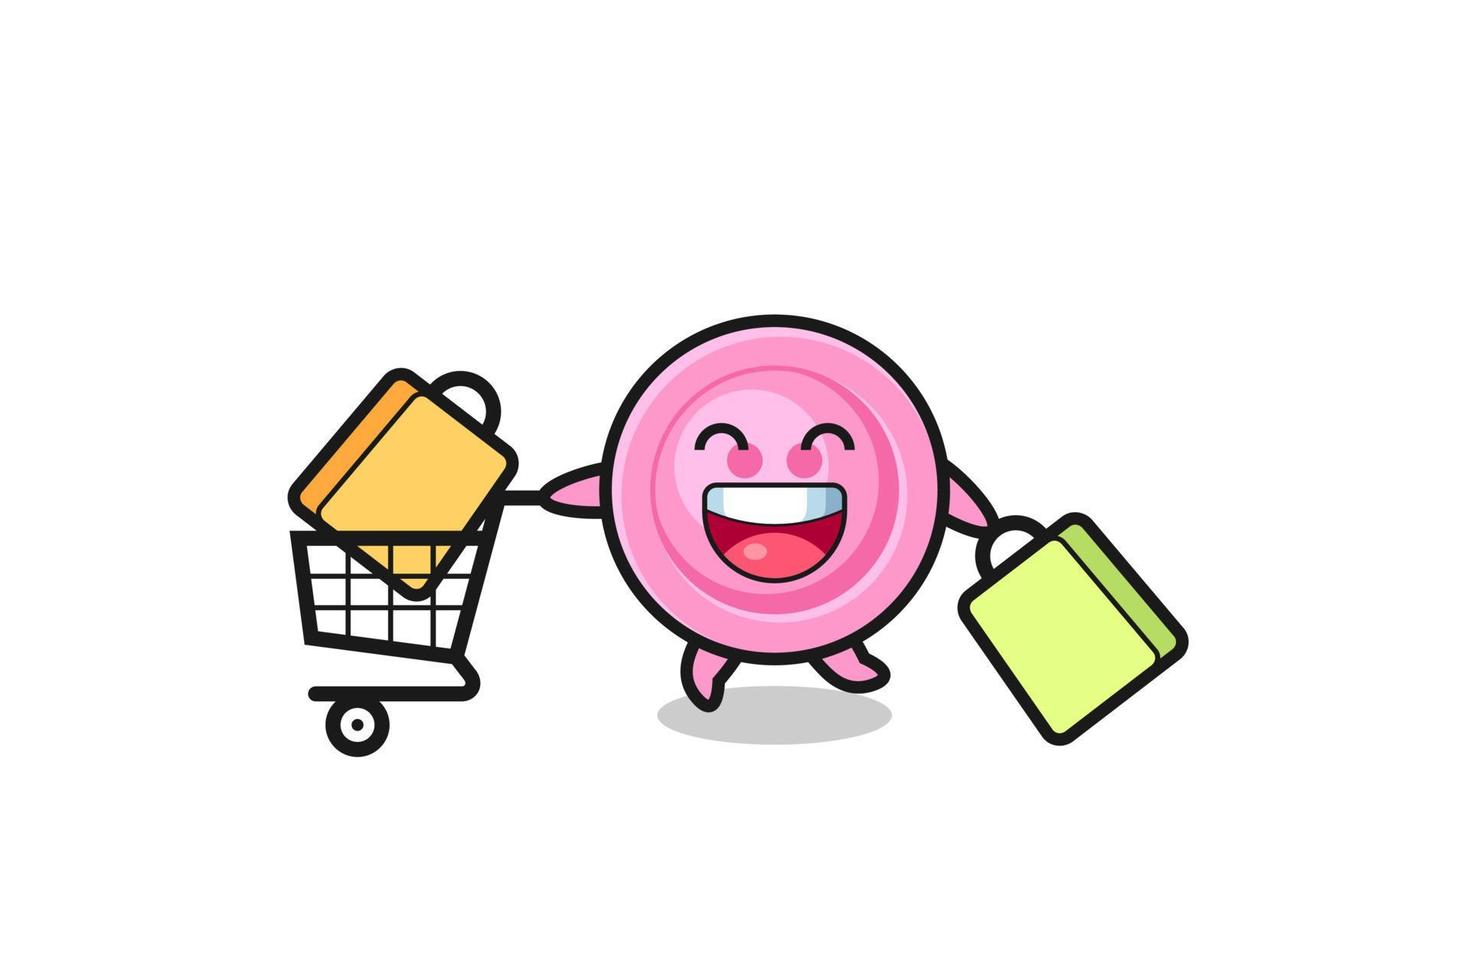 black Friday illustration with cute clothing button mascot vector